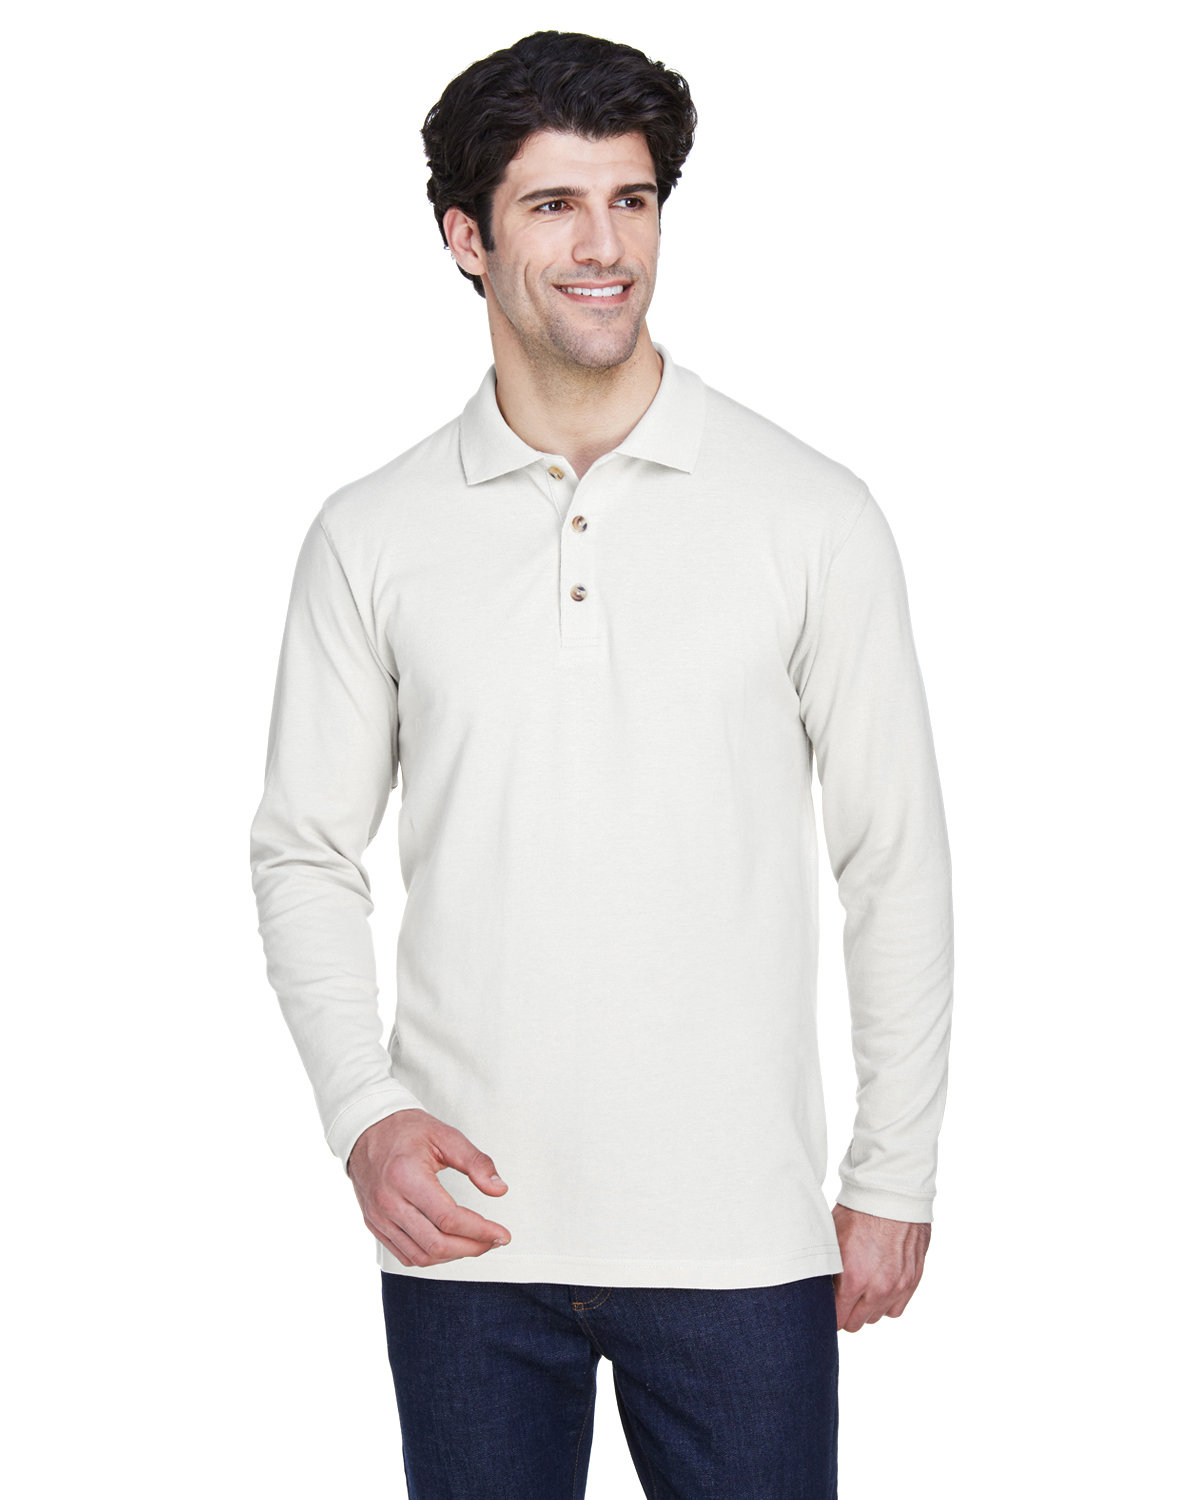 ULTRACLUB Men's Classic Fit Long Sleeve Pique Polo Shirt 8532